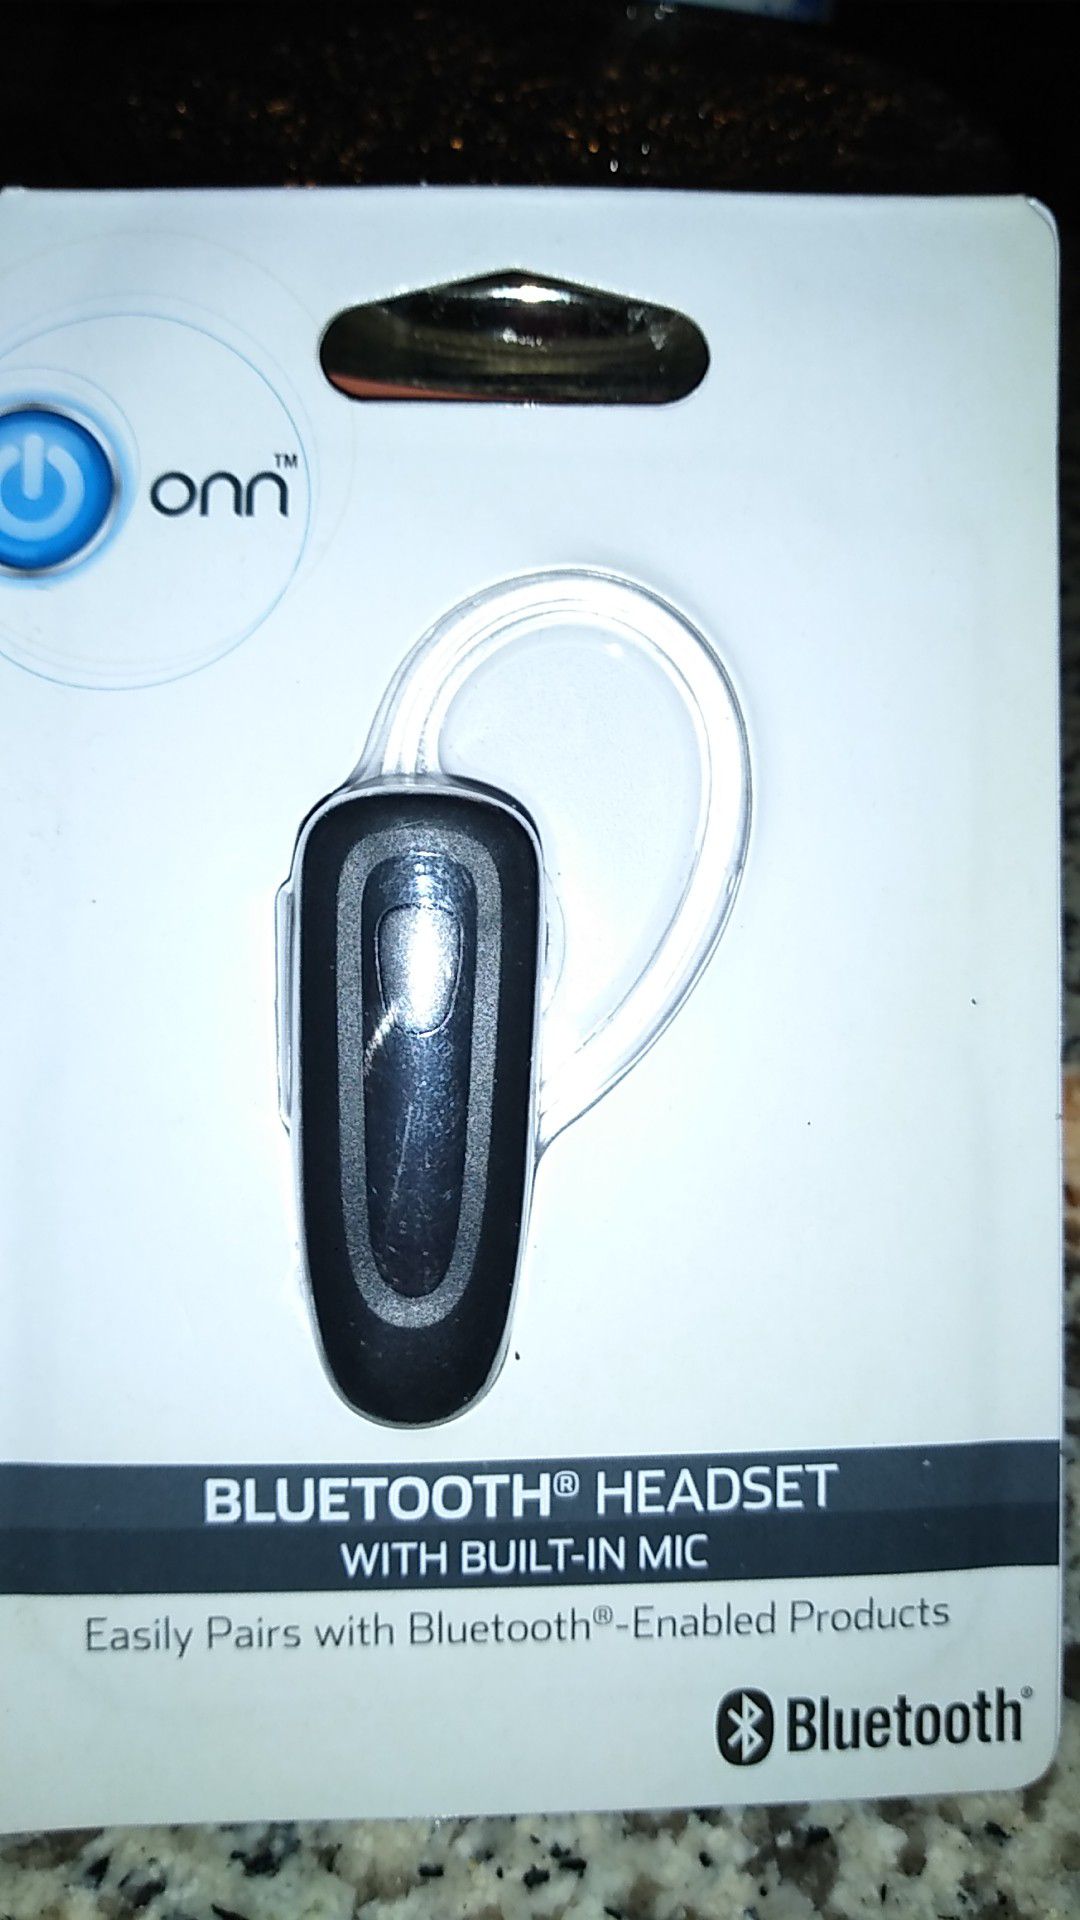 Onn Bluetooth headset with Built-in MIC